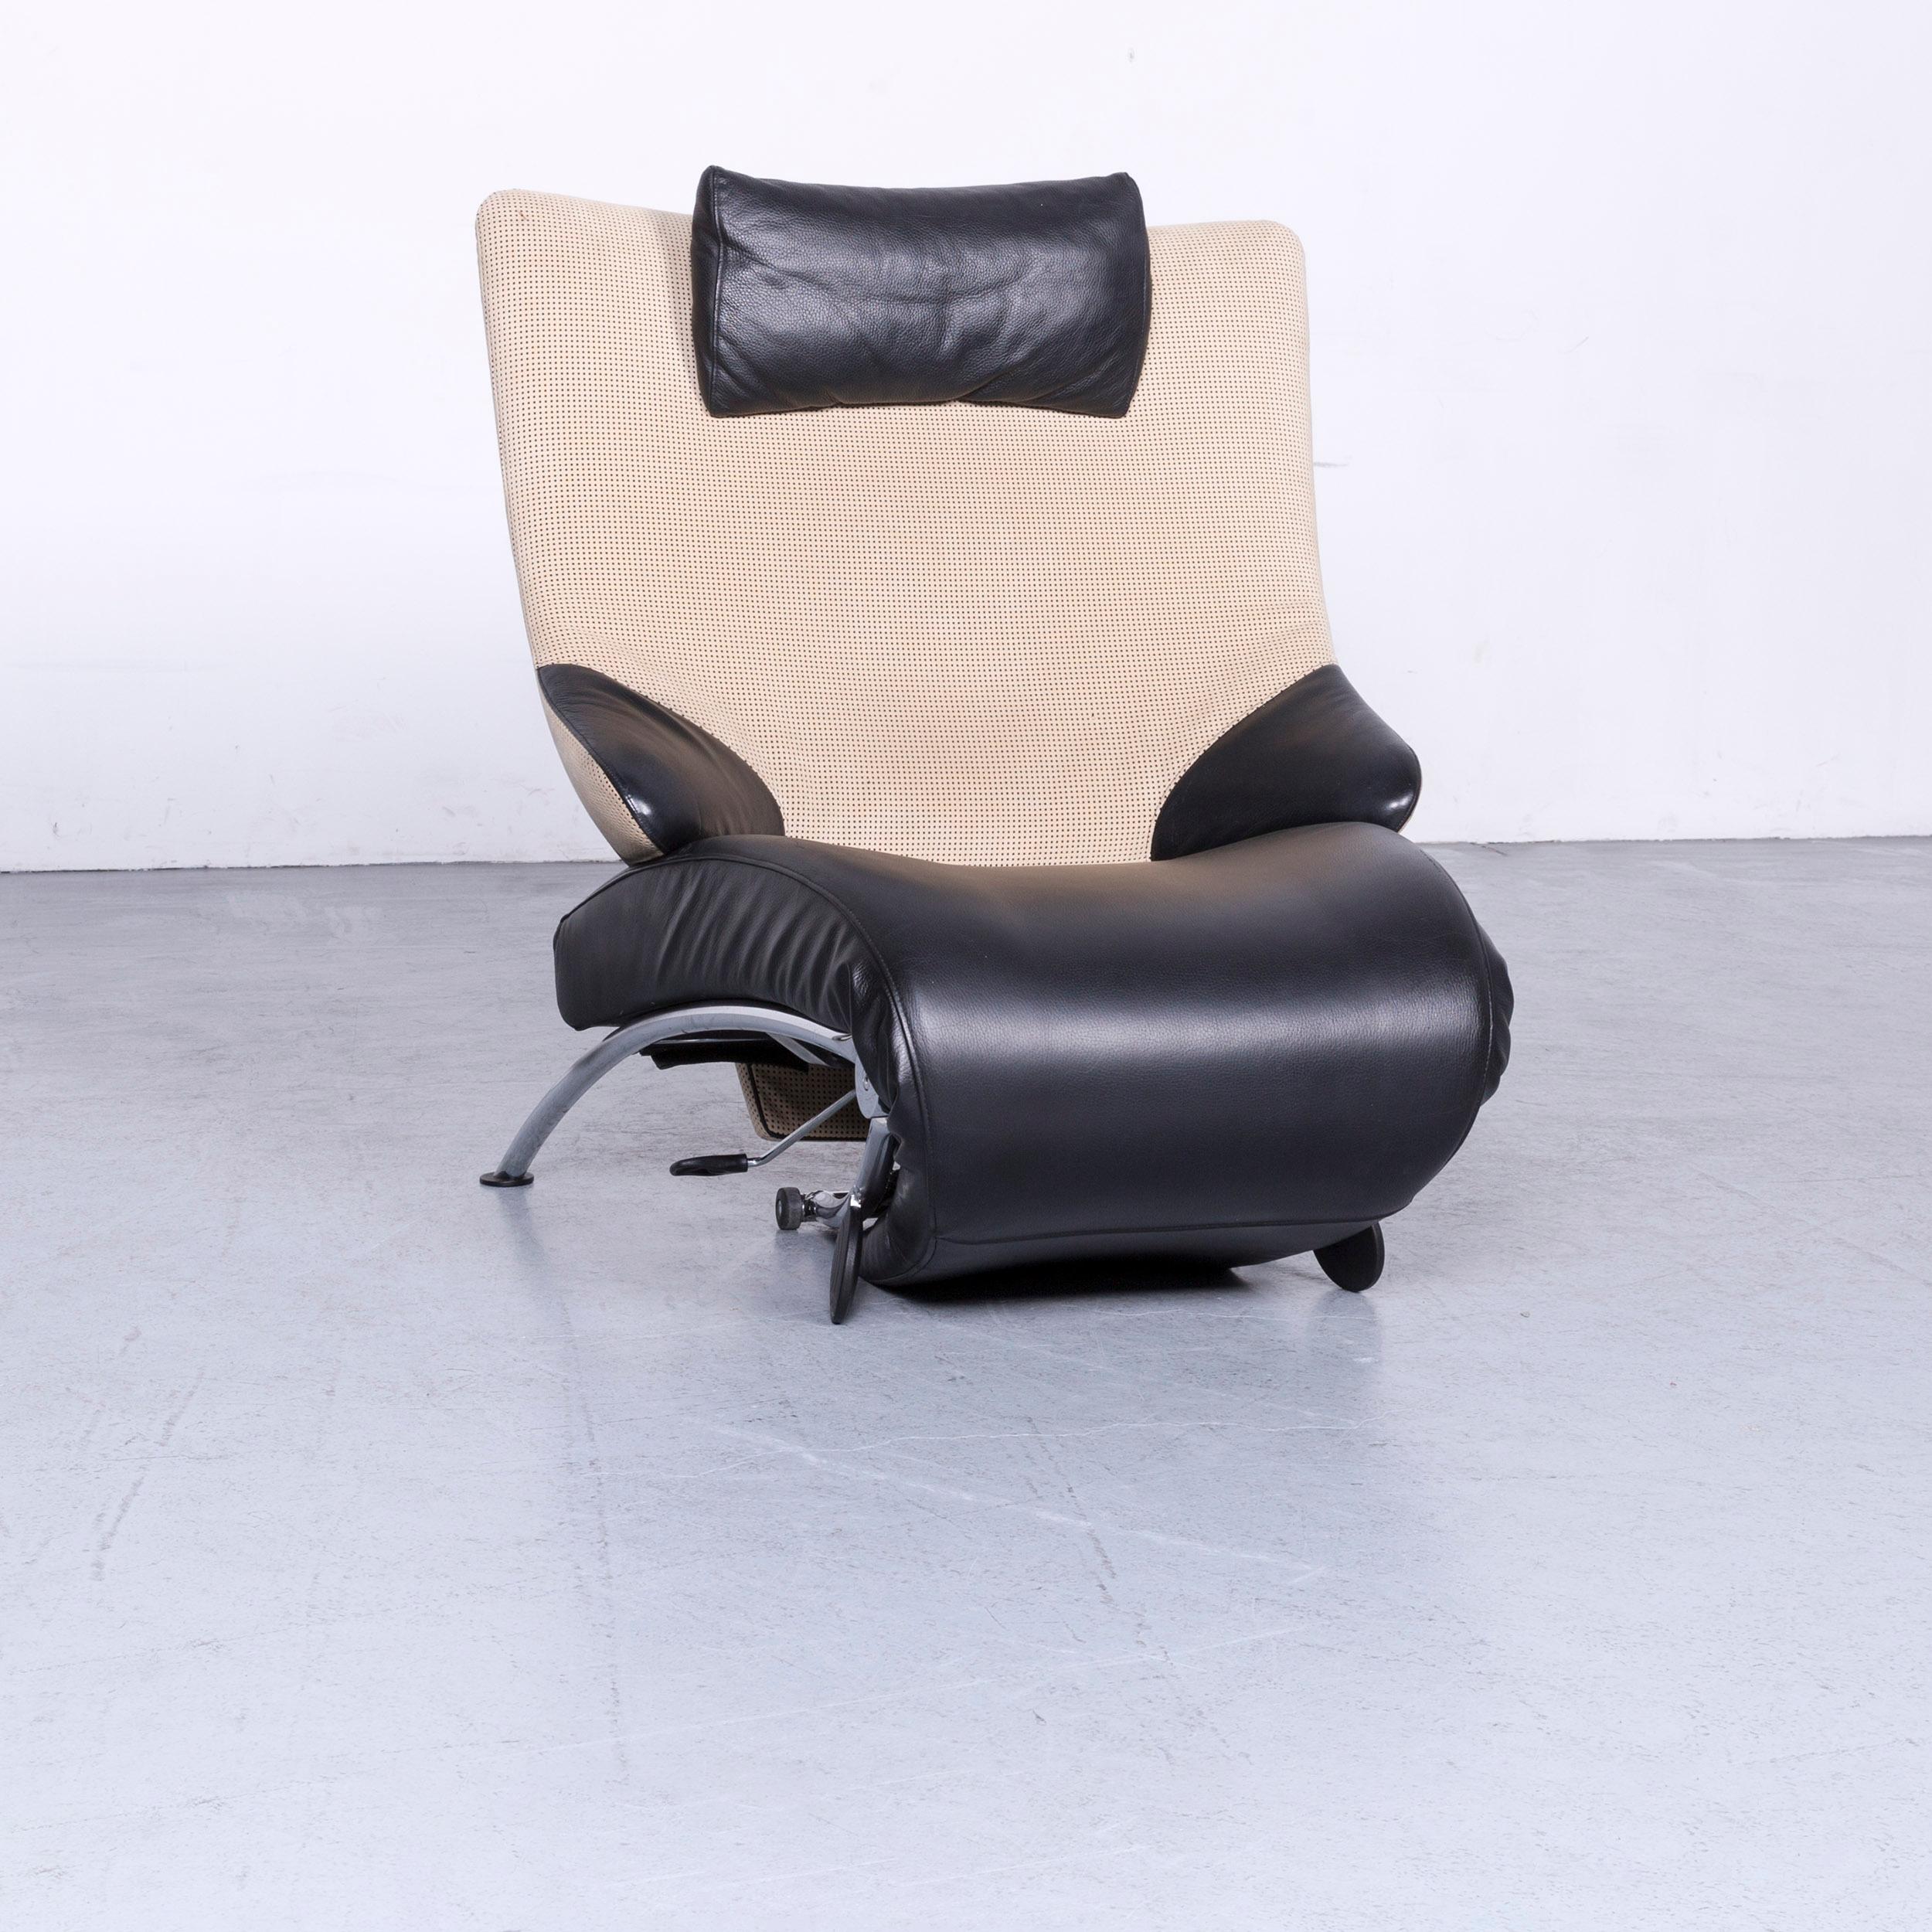 We bring to you an WK Wohnen solo 699 designer leather chair black one-seat.

















